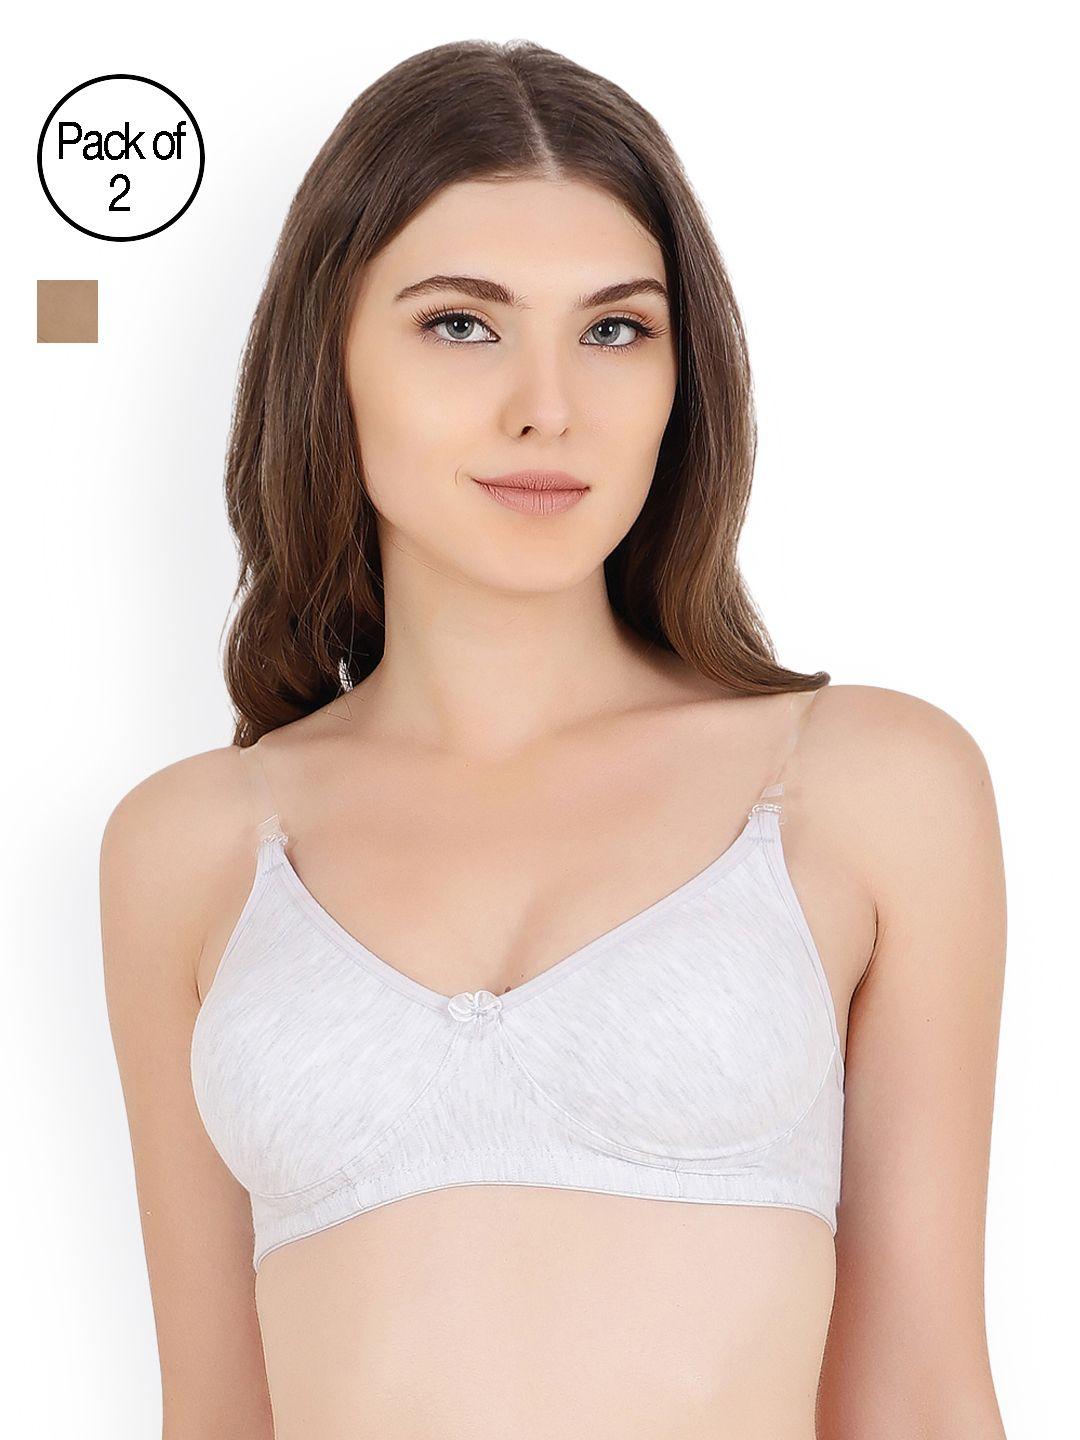 floret pack of 2 solid non-wired non padded t-shirt bra daina_nude-cool grey_40b